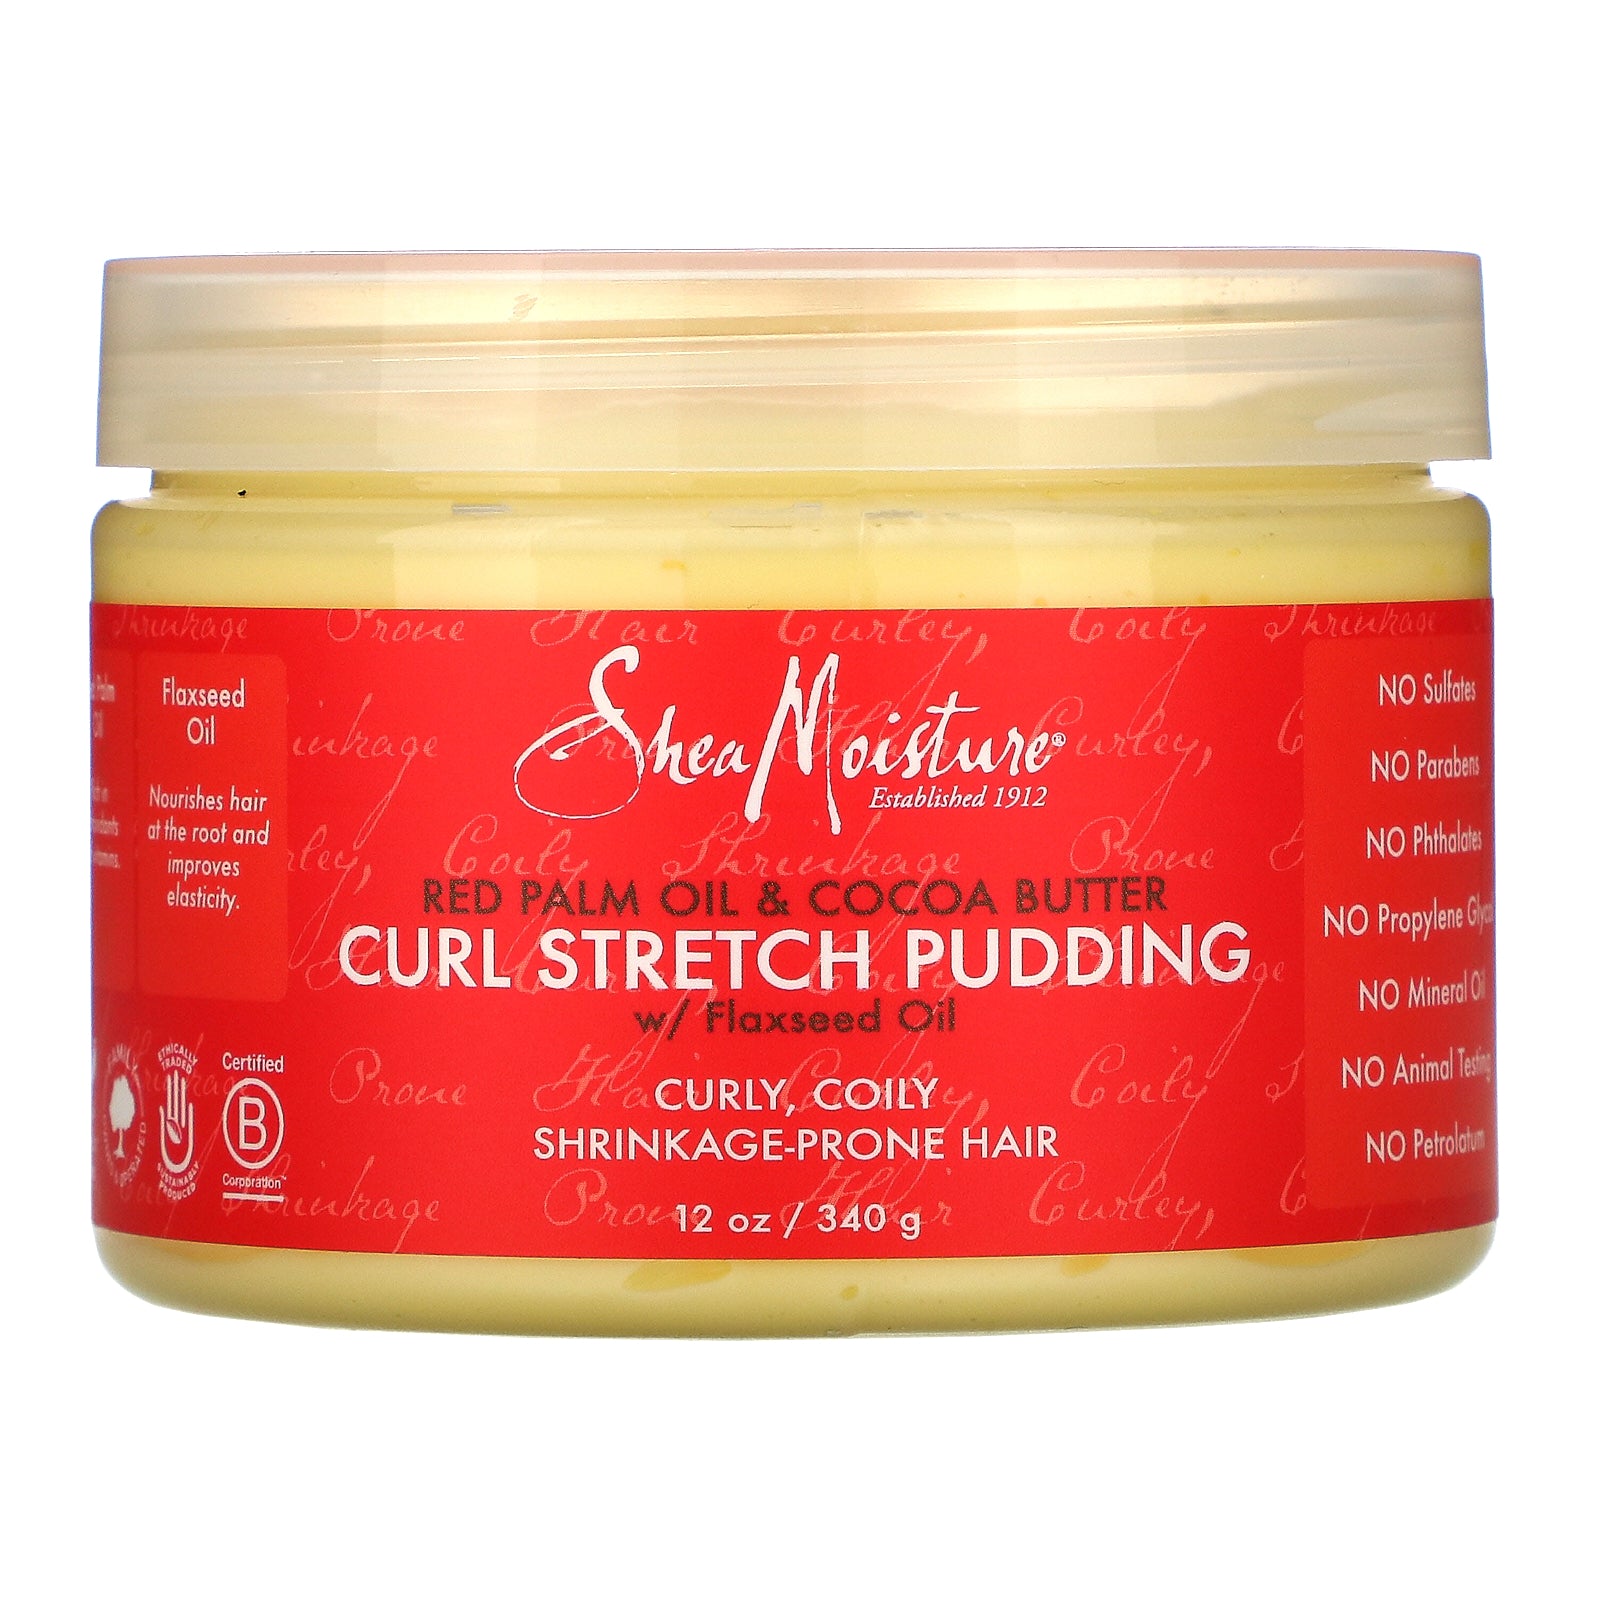 SheaMoisture, Curl Stretch Pudding, Red Palm Oil & Cocoa Butter, 12 oz (340 g)